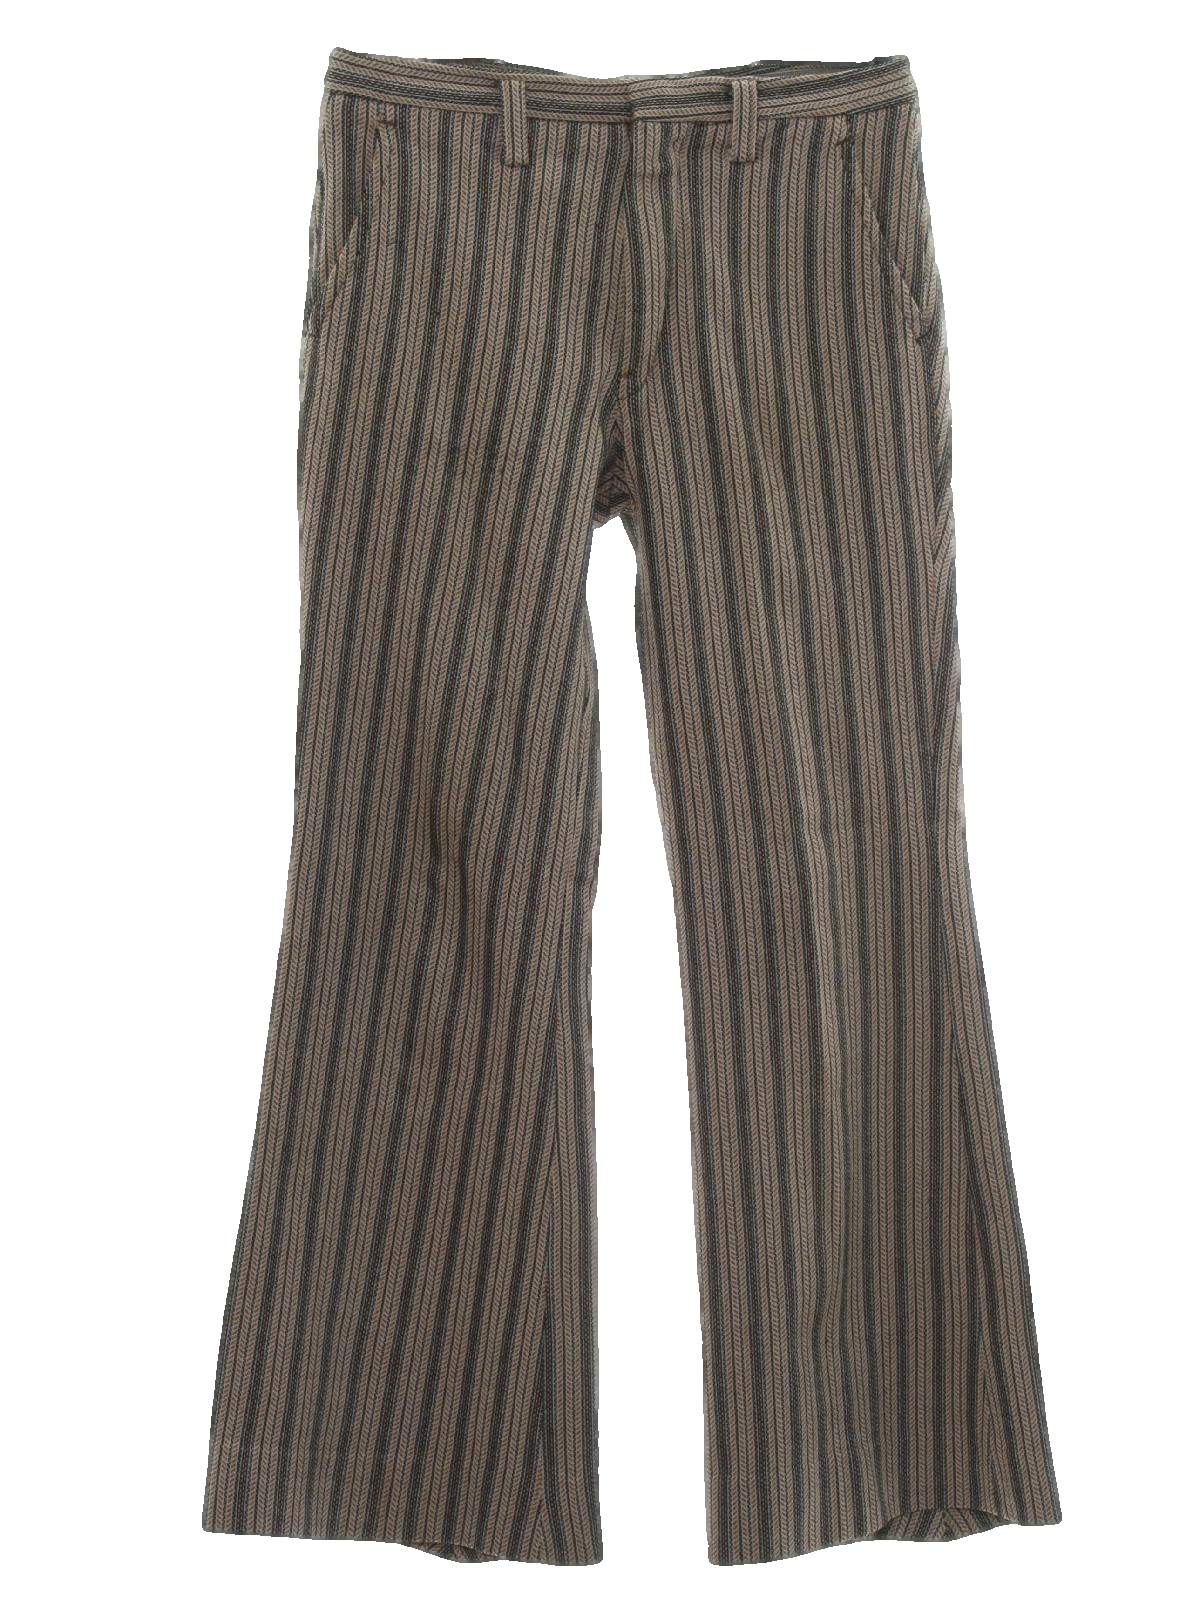 1960's Vintage RC 5th Bellbottom Pants: 60s -RC 5th- Mens shades of ...